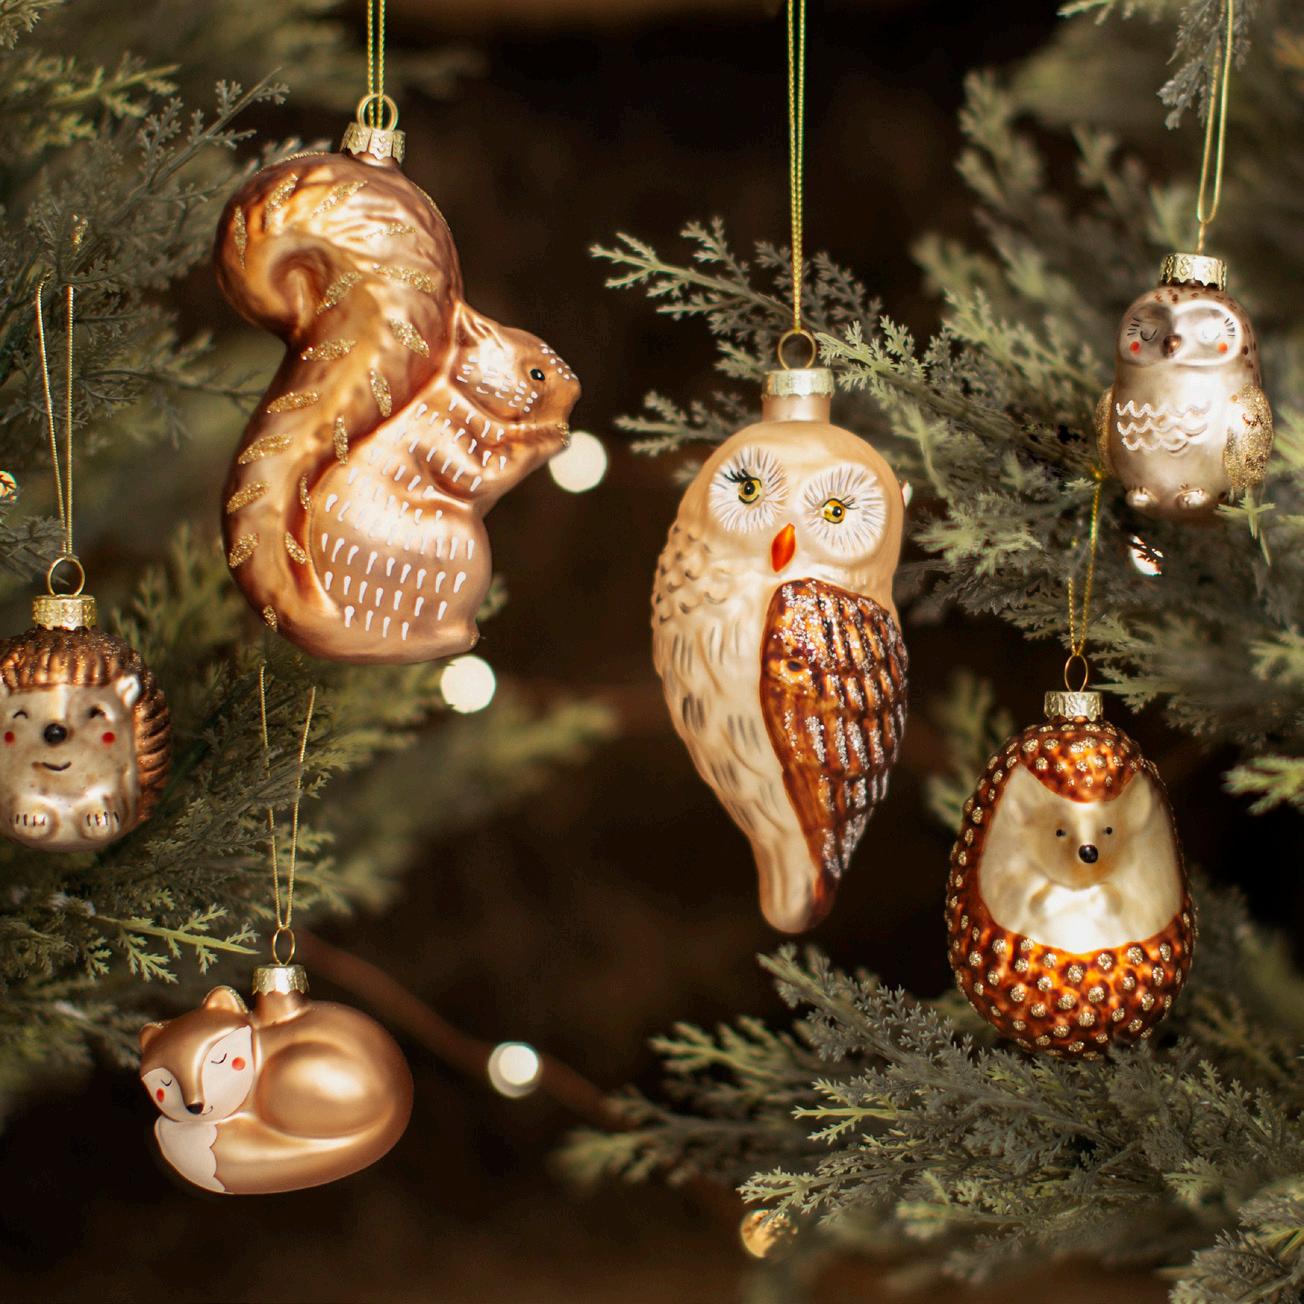 This extremely cute baby hedgehog glass Christmas decoration will definitely melt some hearts this festive season! How about creating a magical woodland theme this year?